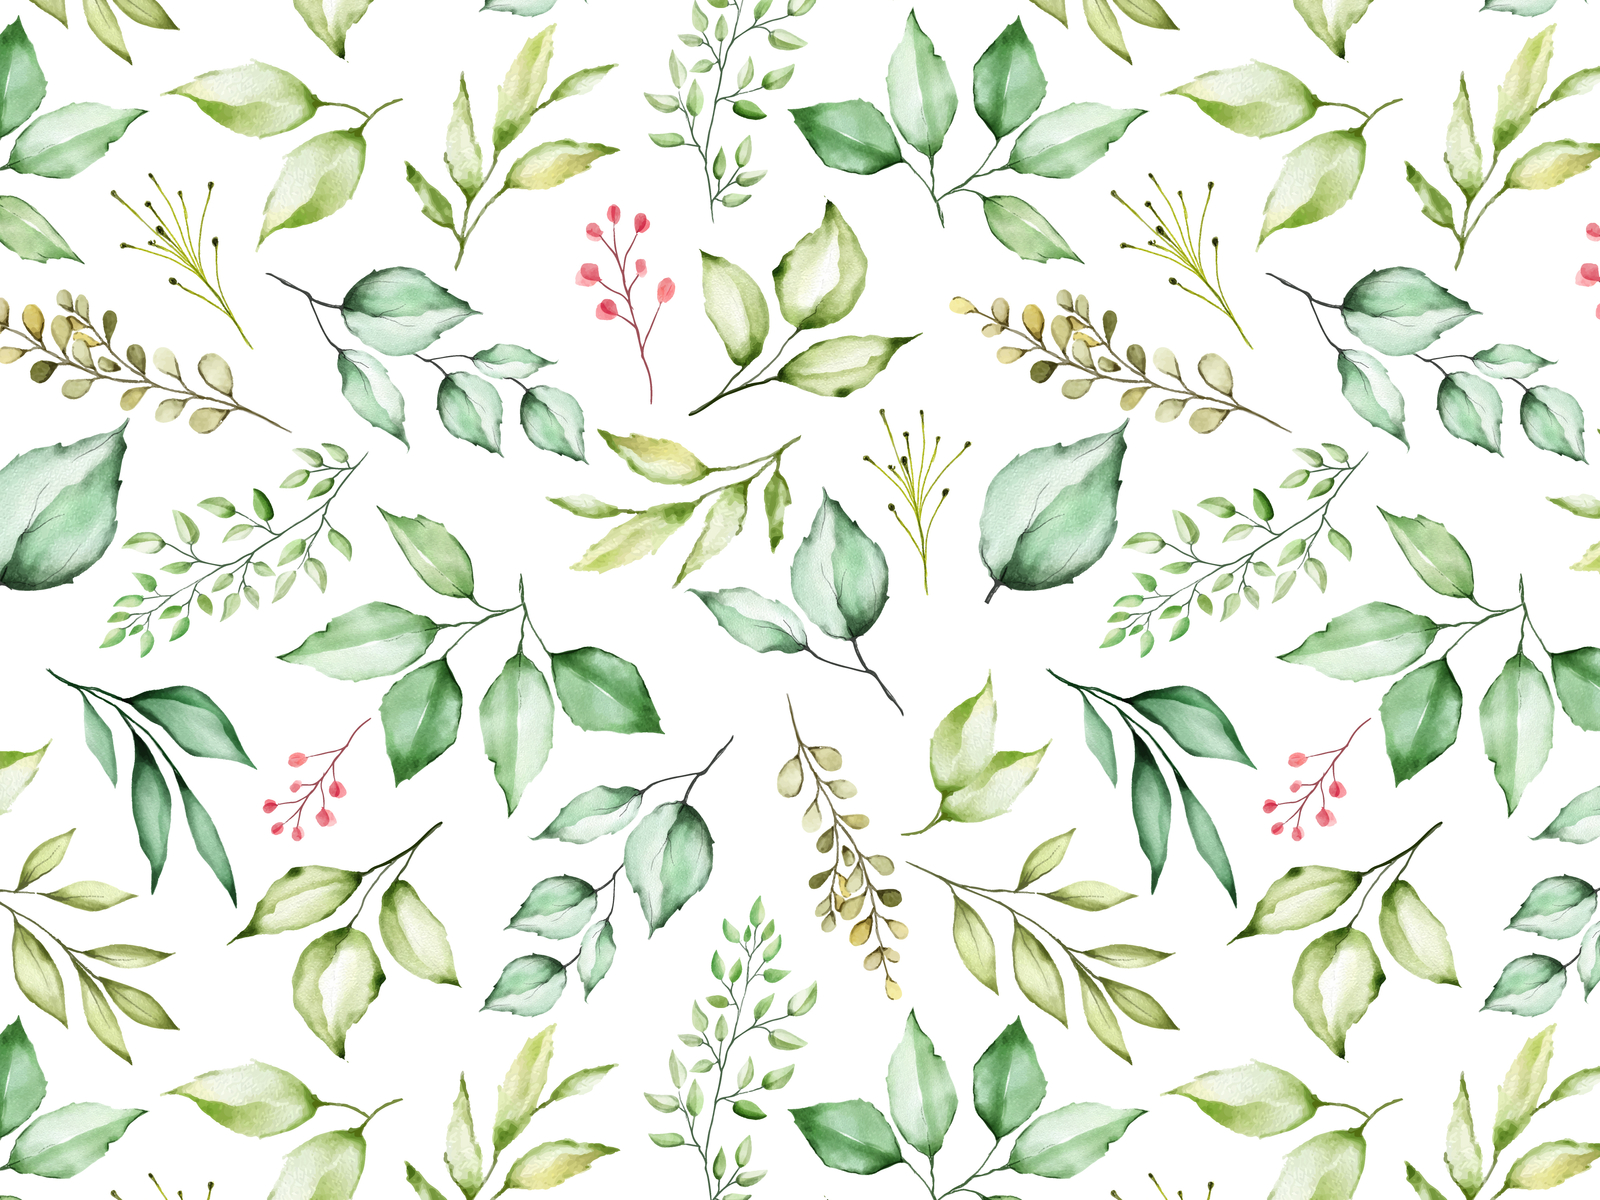 watercolor floral and leaves seamless pattern by volcebyyou Studio on